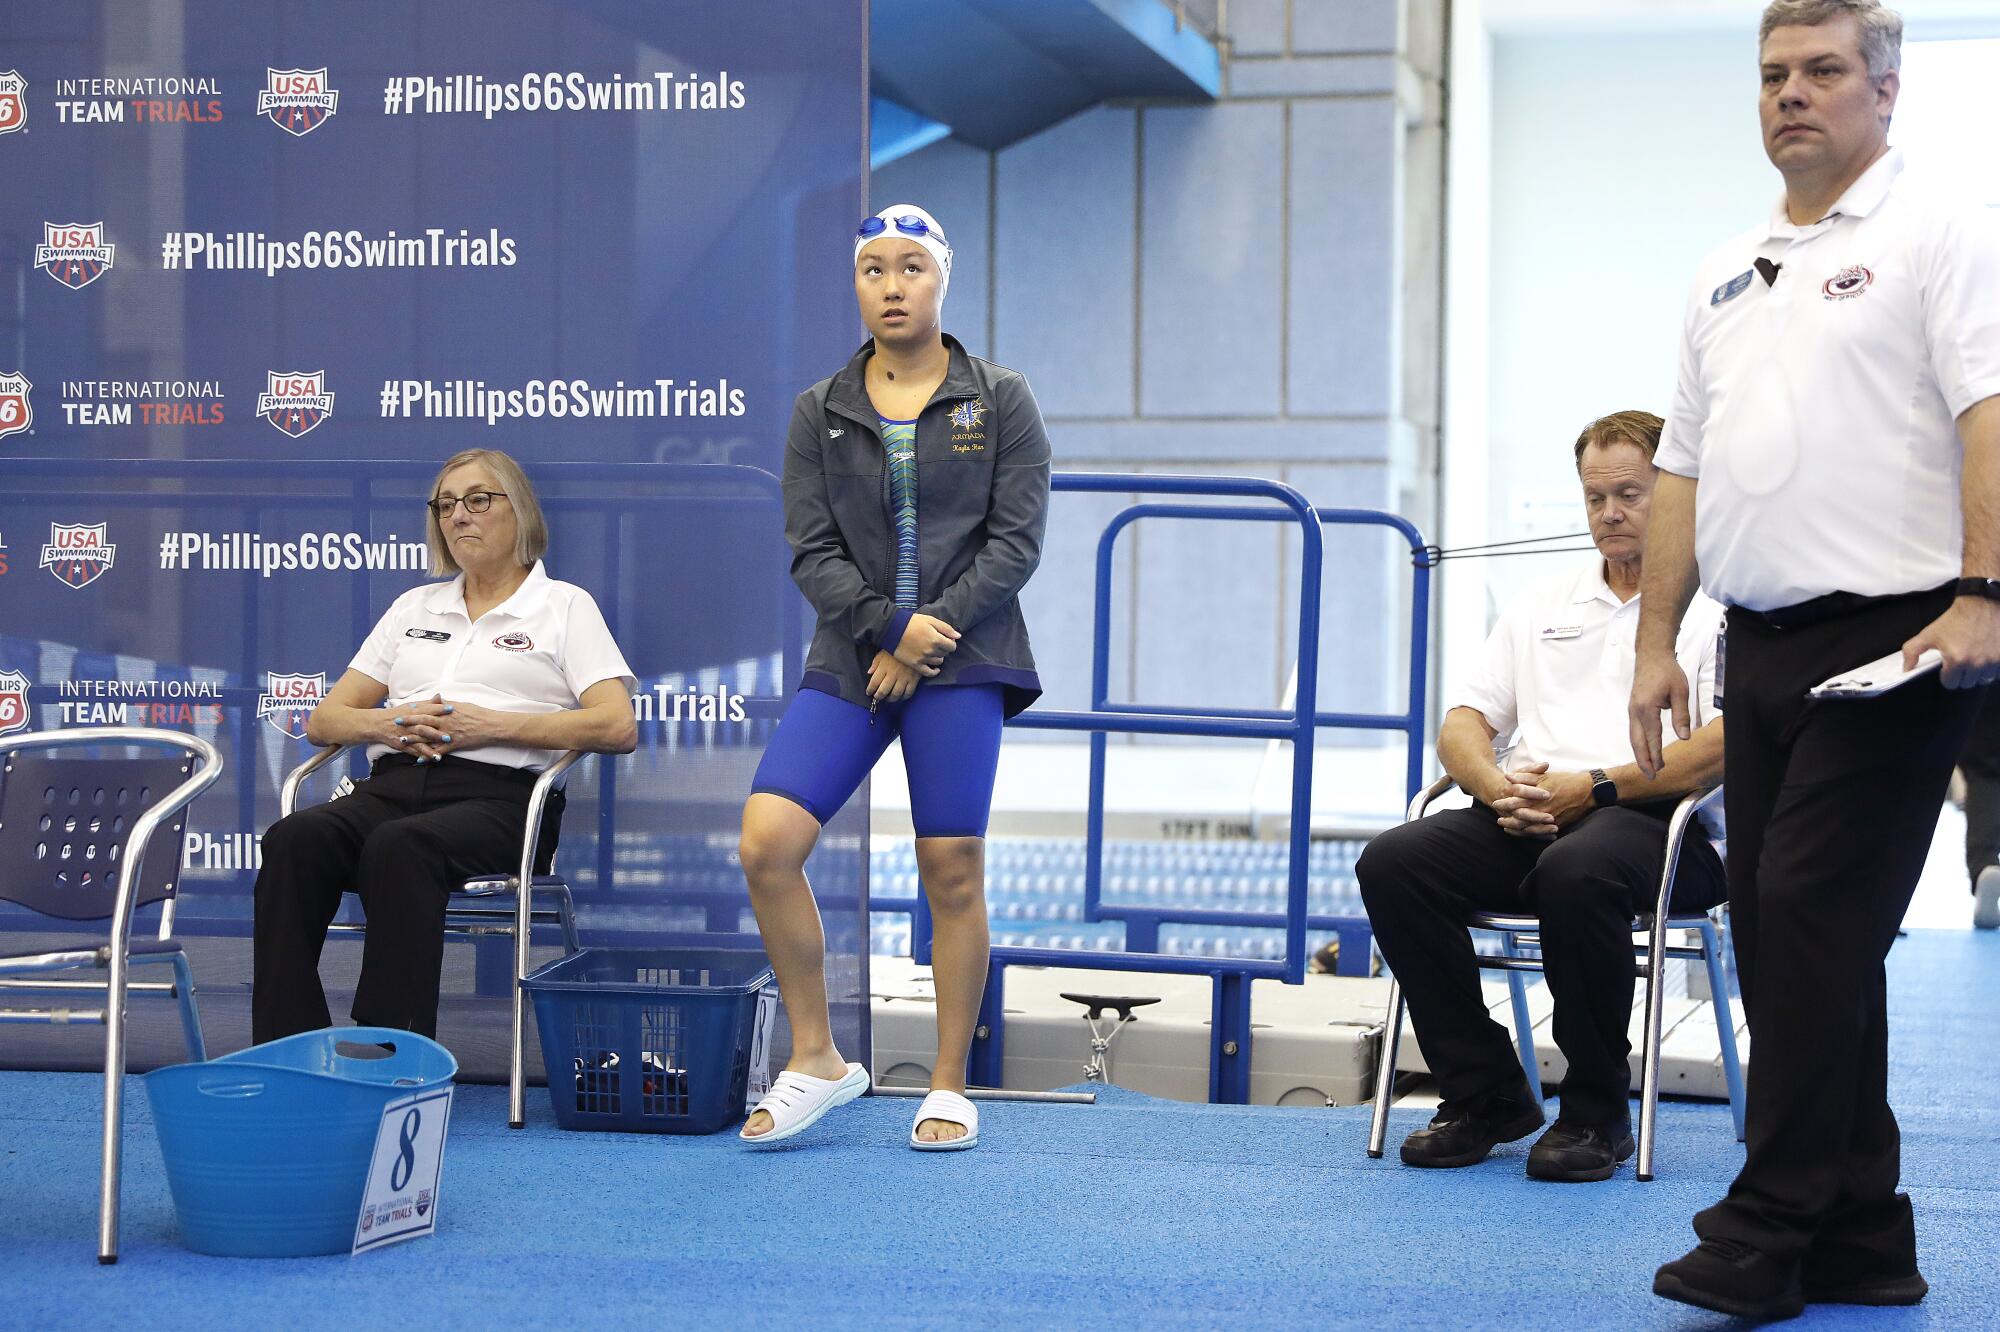 Kayla Han waits to compete in the 2022 Phillips 66 International Team Trials